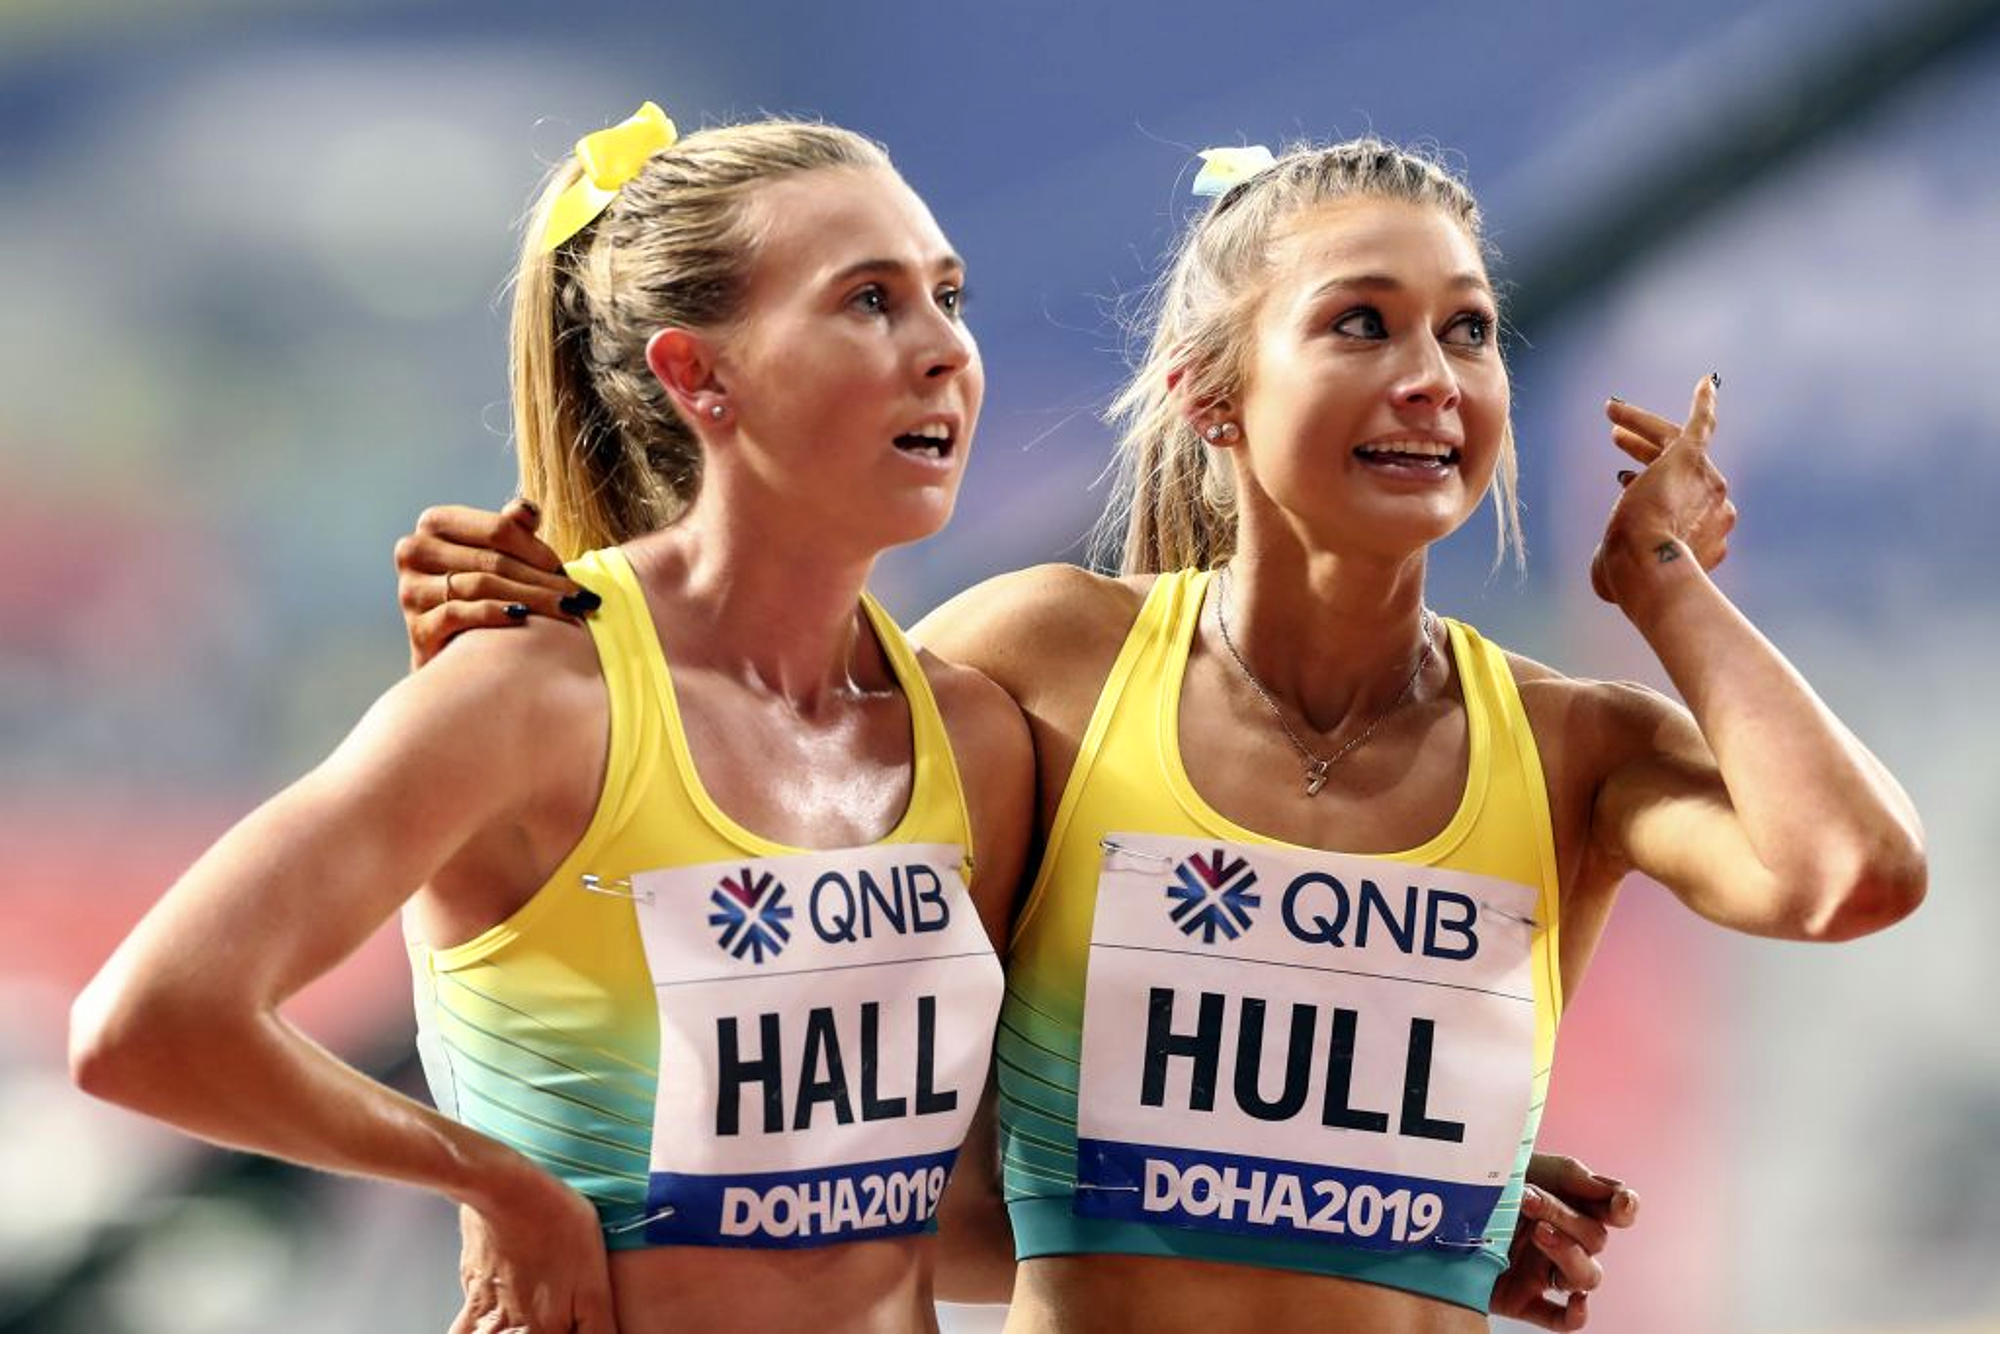 Jessica Hull (R) and Linden Hall (L) of Australia compete in the Women's 1500m semi final race during the 17th IAAF World Athletics Championships Doha 2019 on October 03, 2019 in Doha, Qatar.